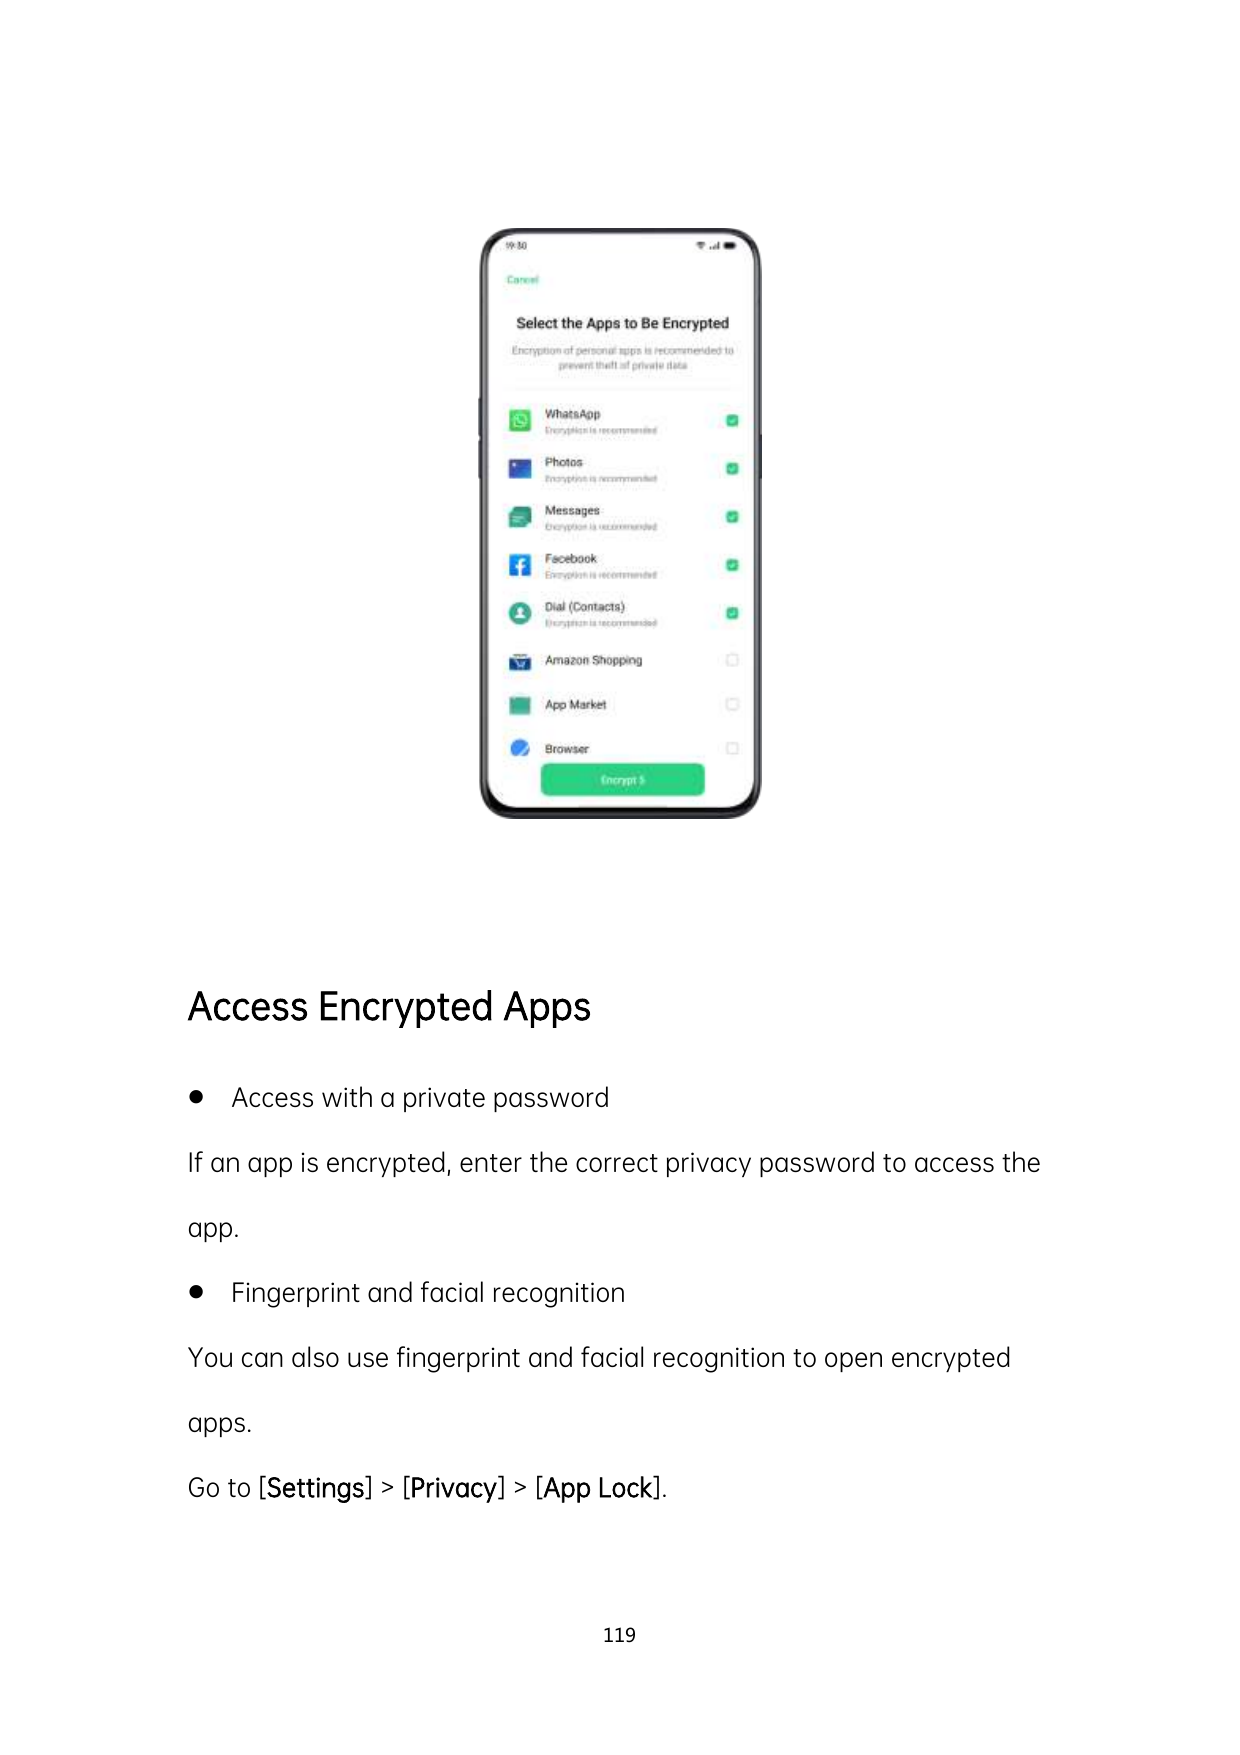 Access Encrypted AppsAccess with a private passwordIf an app is encrypted, enter the correct privacy password to access theapp.